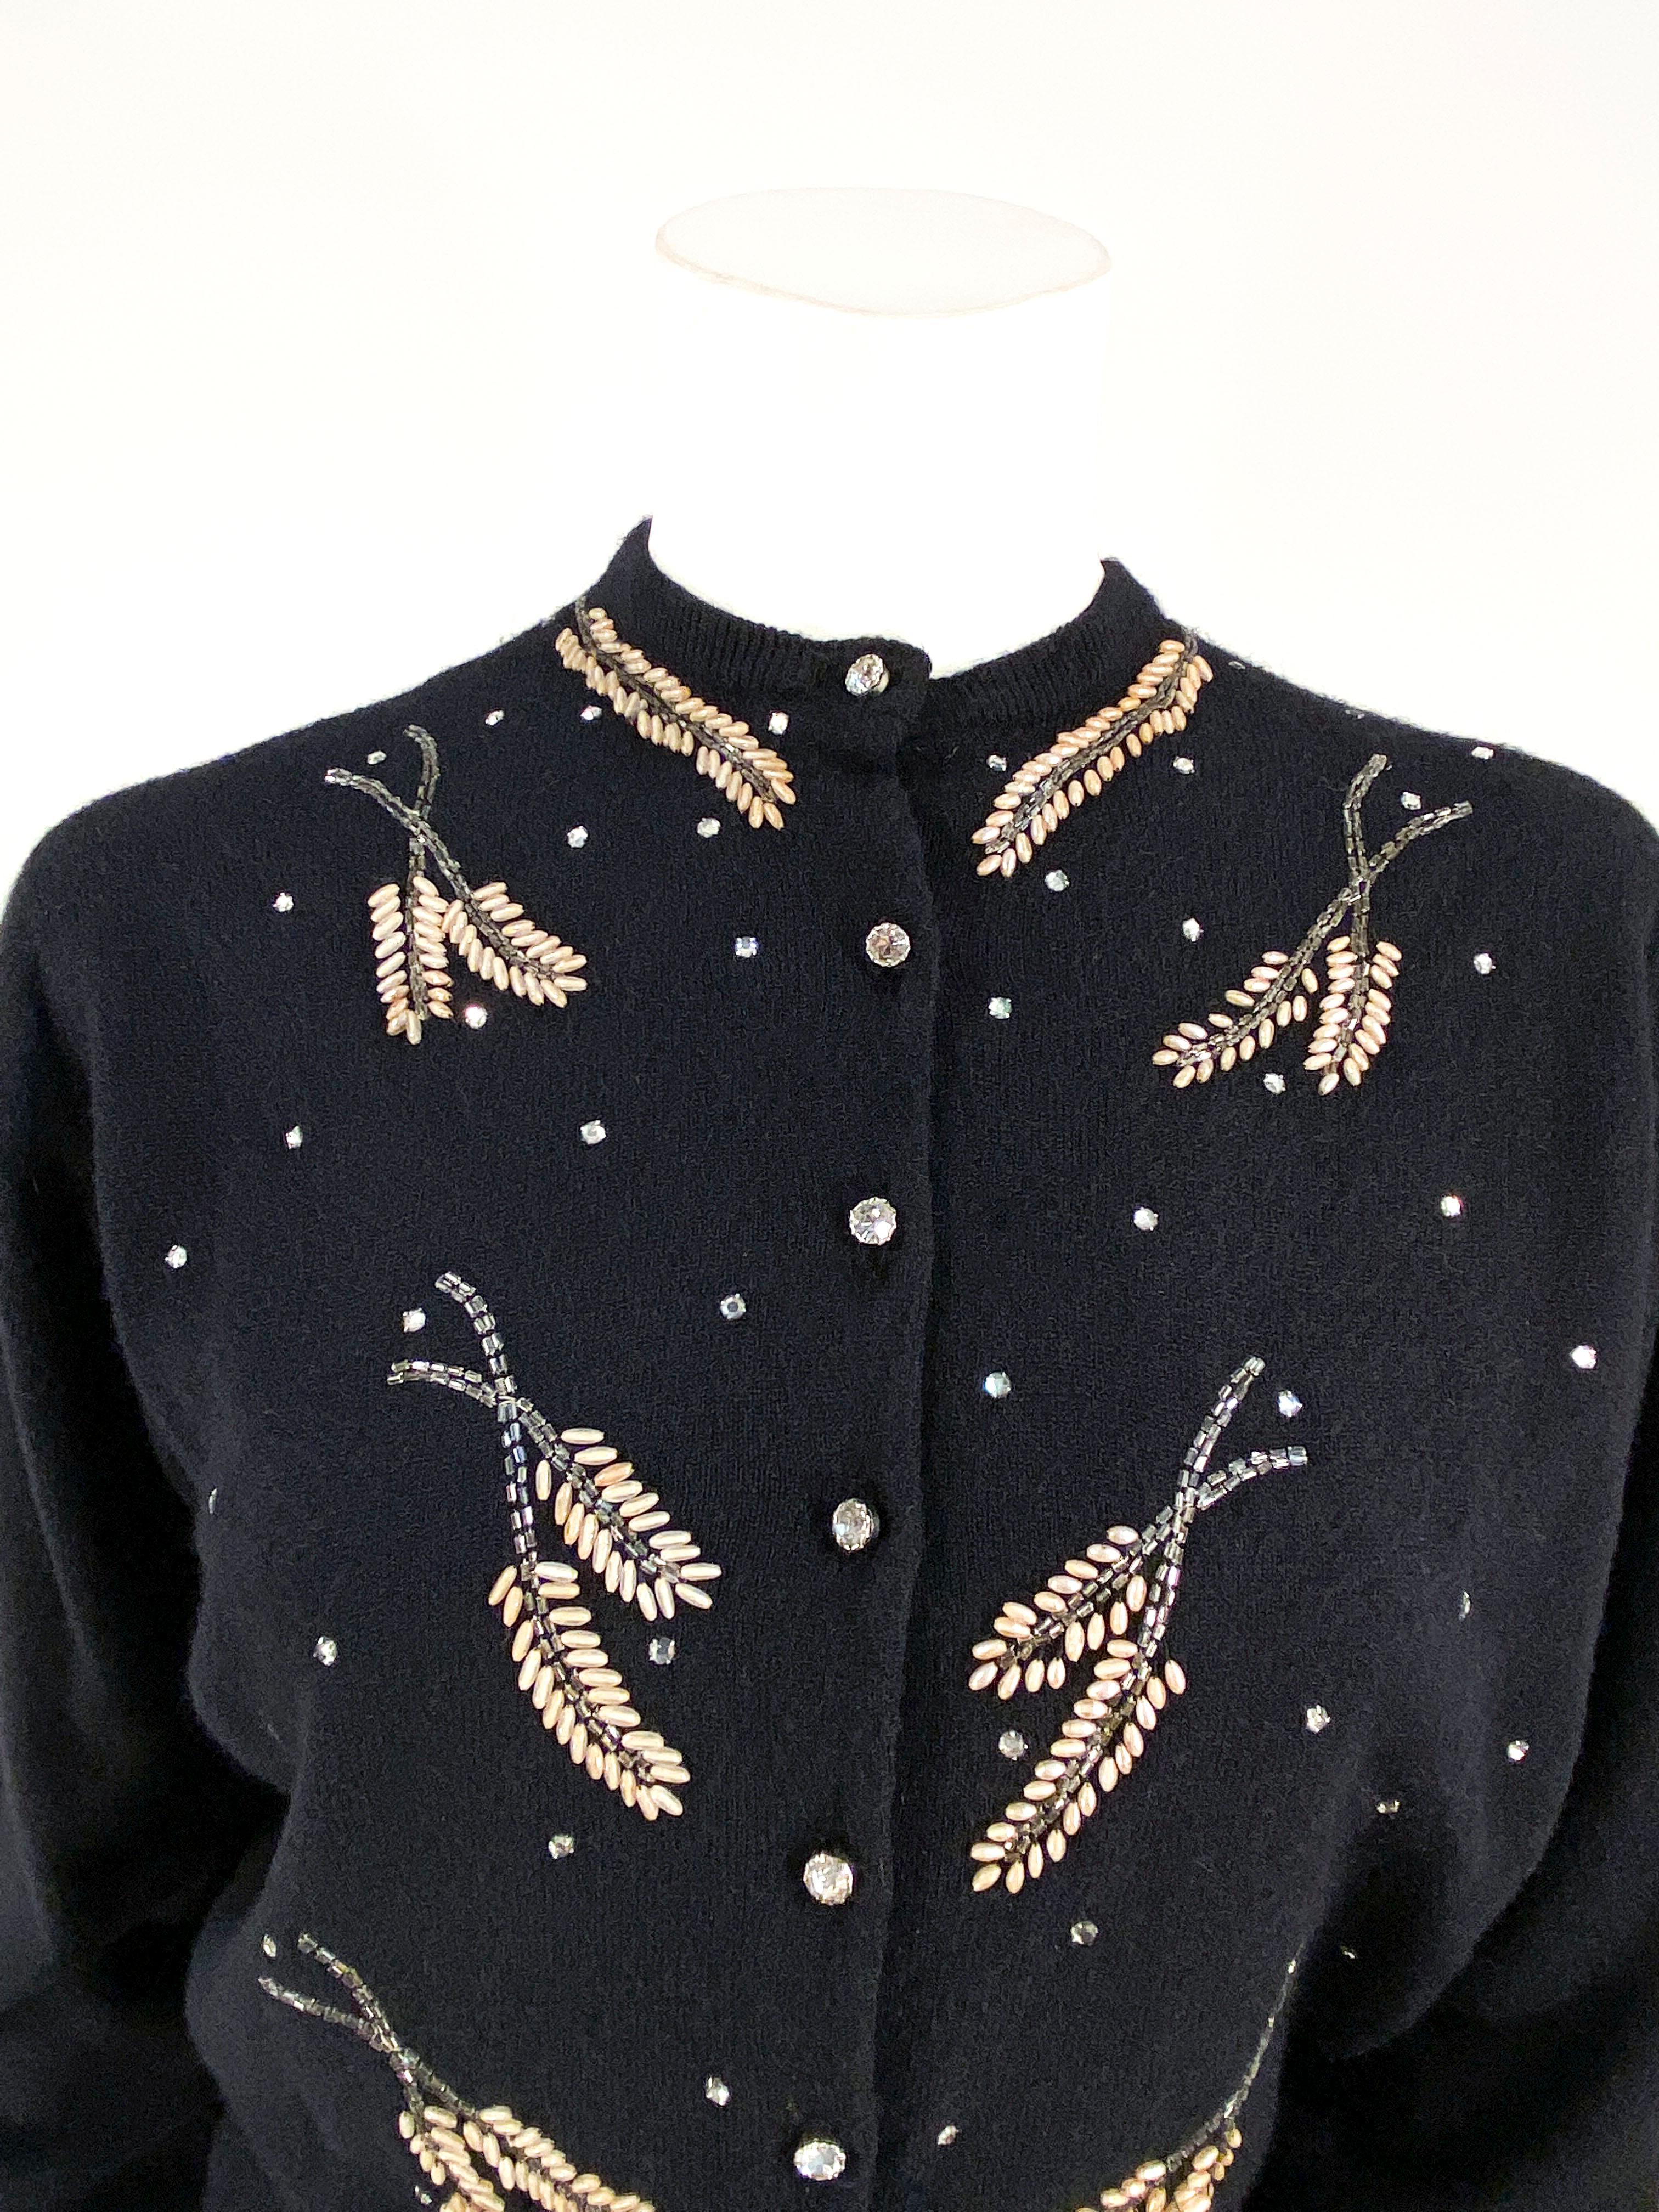 1950s Schiaparelli black cashmere cardigan sweater with large rhinestone studding and beadwork set in leaf patterns. The front has large rhinestone buttons on the front closure, the cuff ribbing is elongated to be worn in a rolled-up cuff fashion